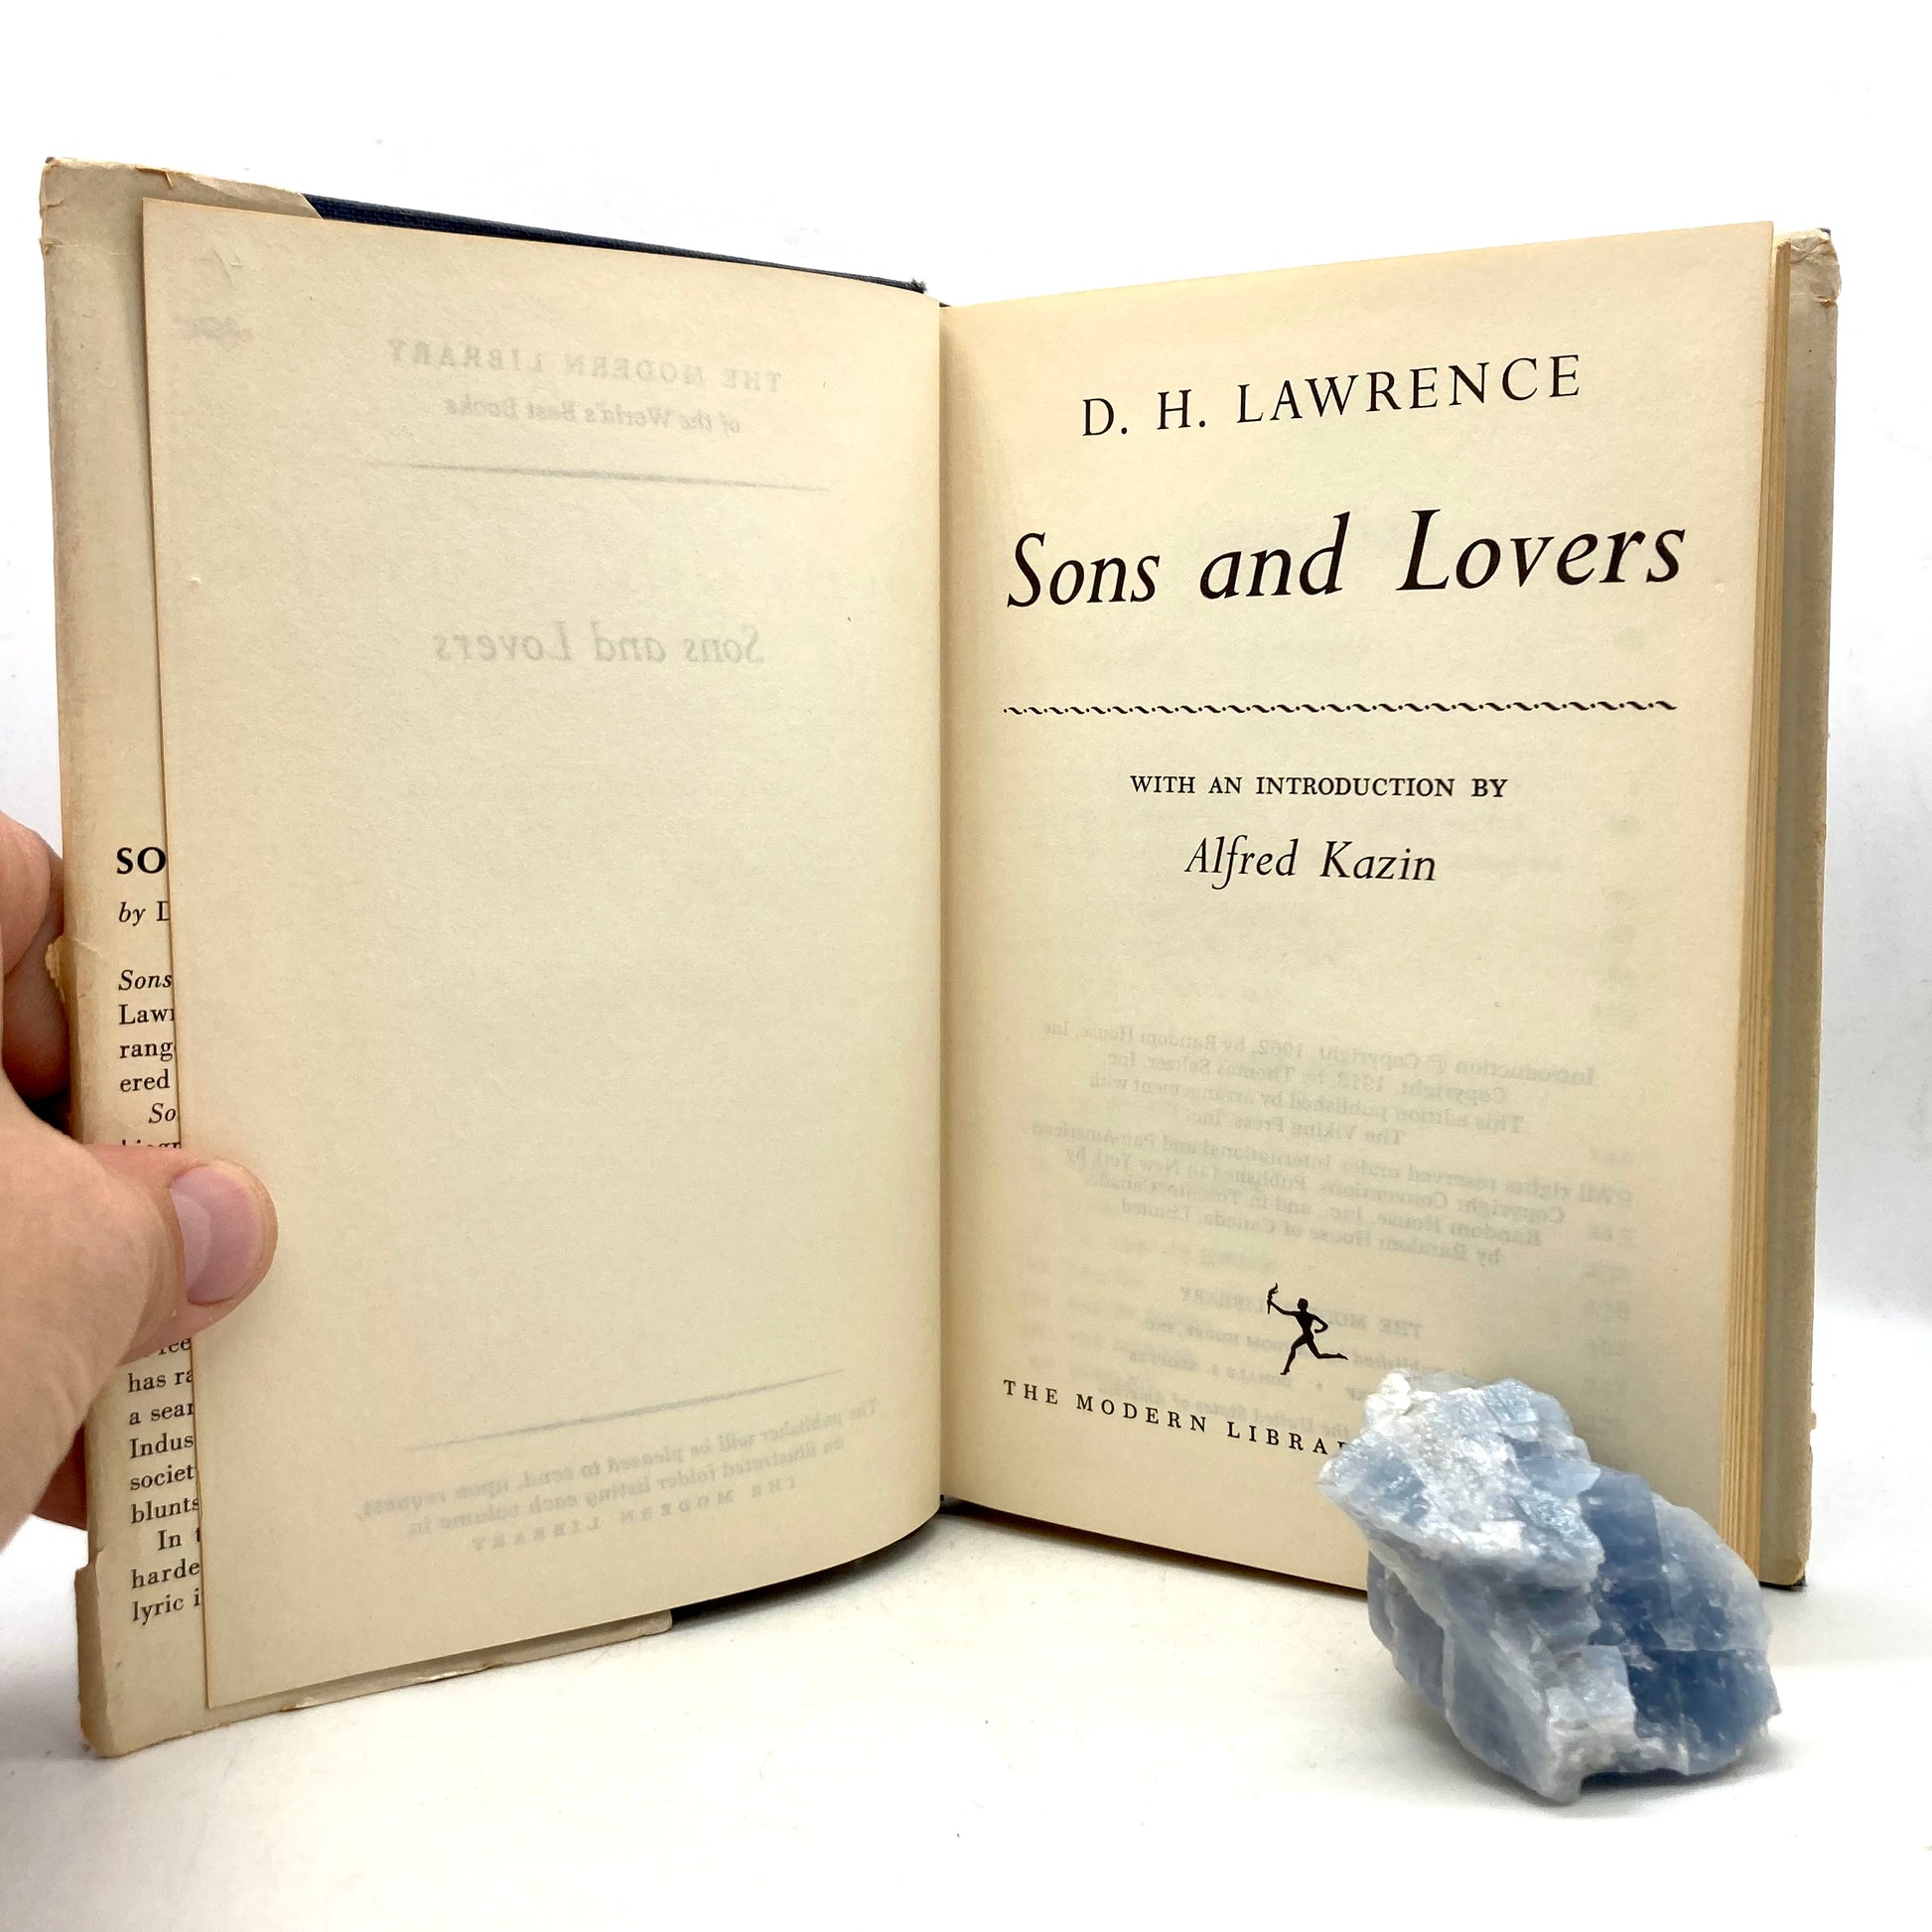 LAWRENCE, D.H. "Sons and Lovers by DH Lawrence [Modern Library, 1962] - Buzz Bookstore